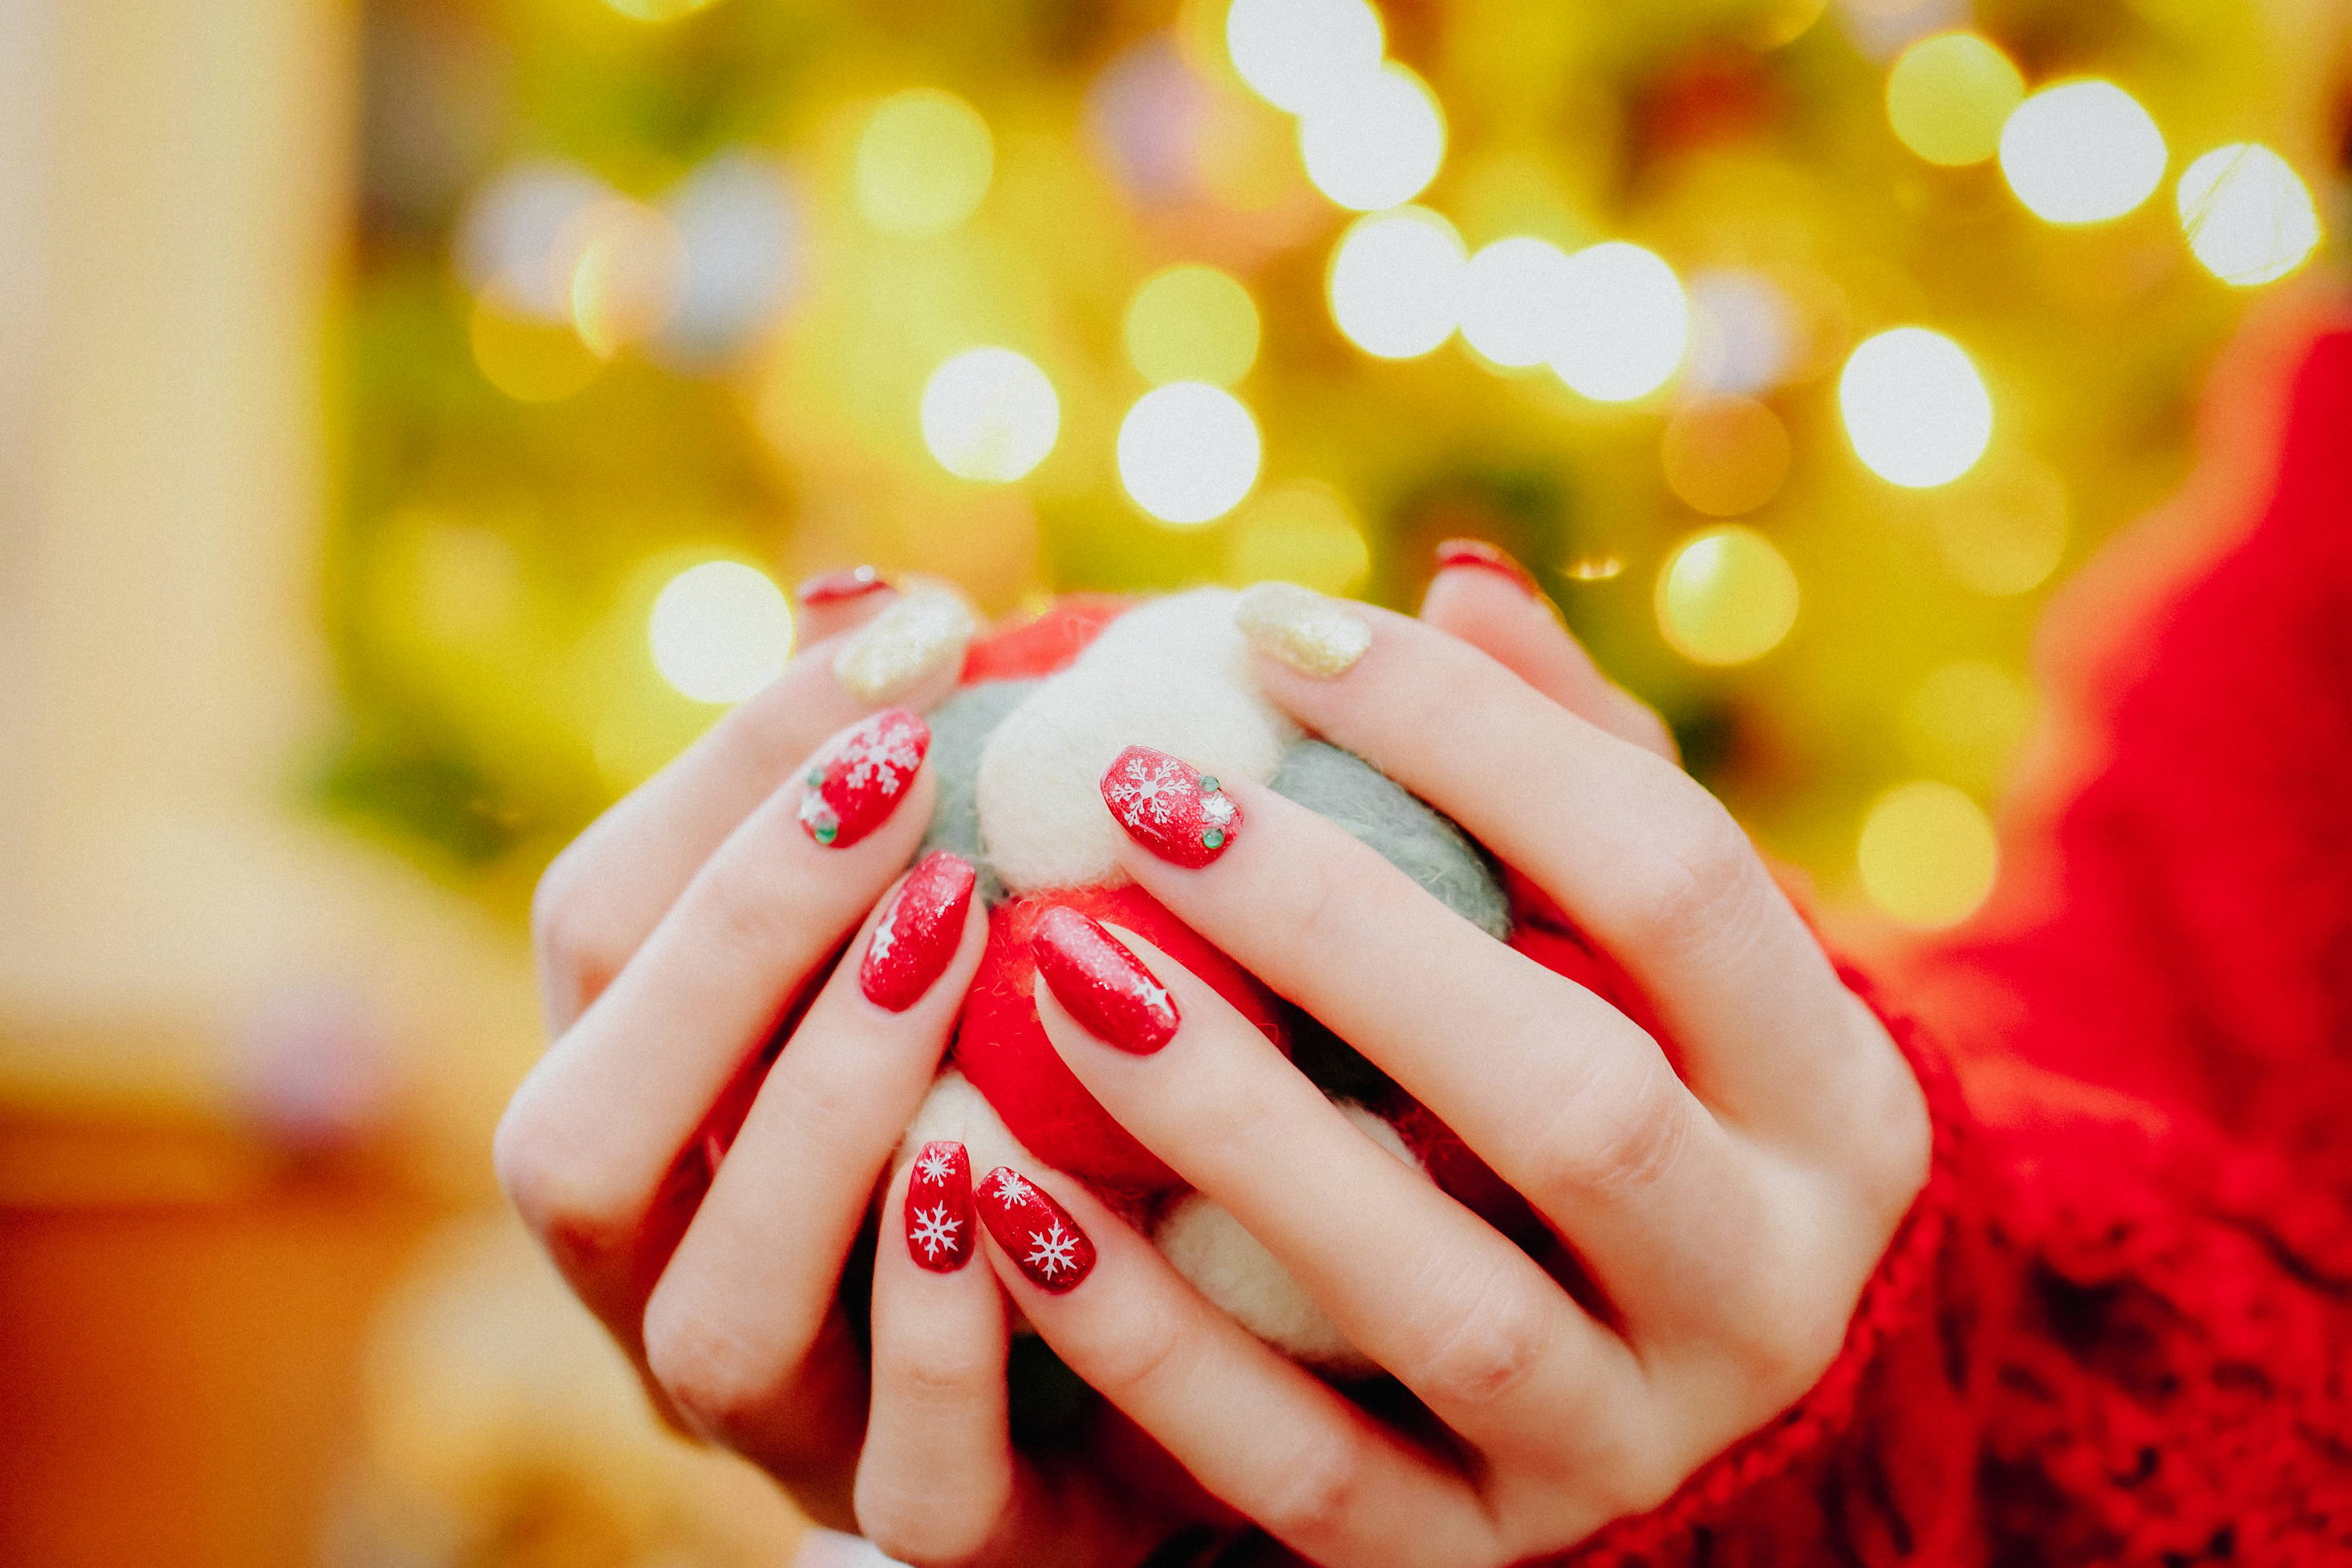 A woman shows off her festive holiday manicure at Christmas time. 